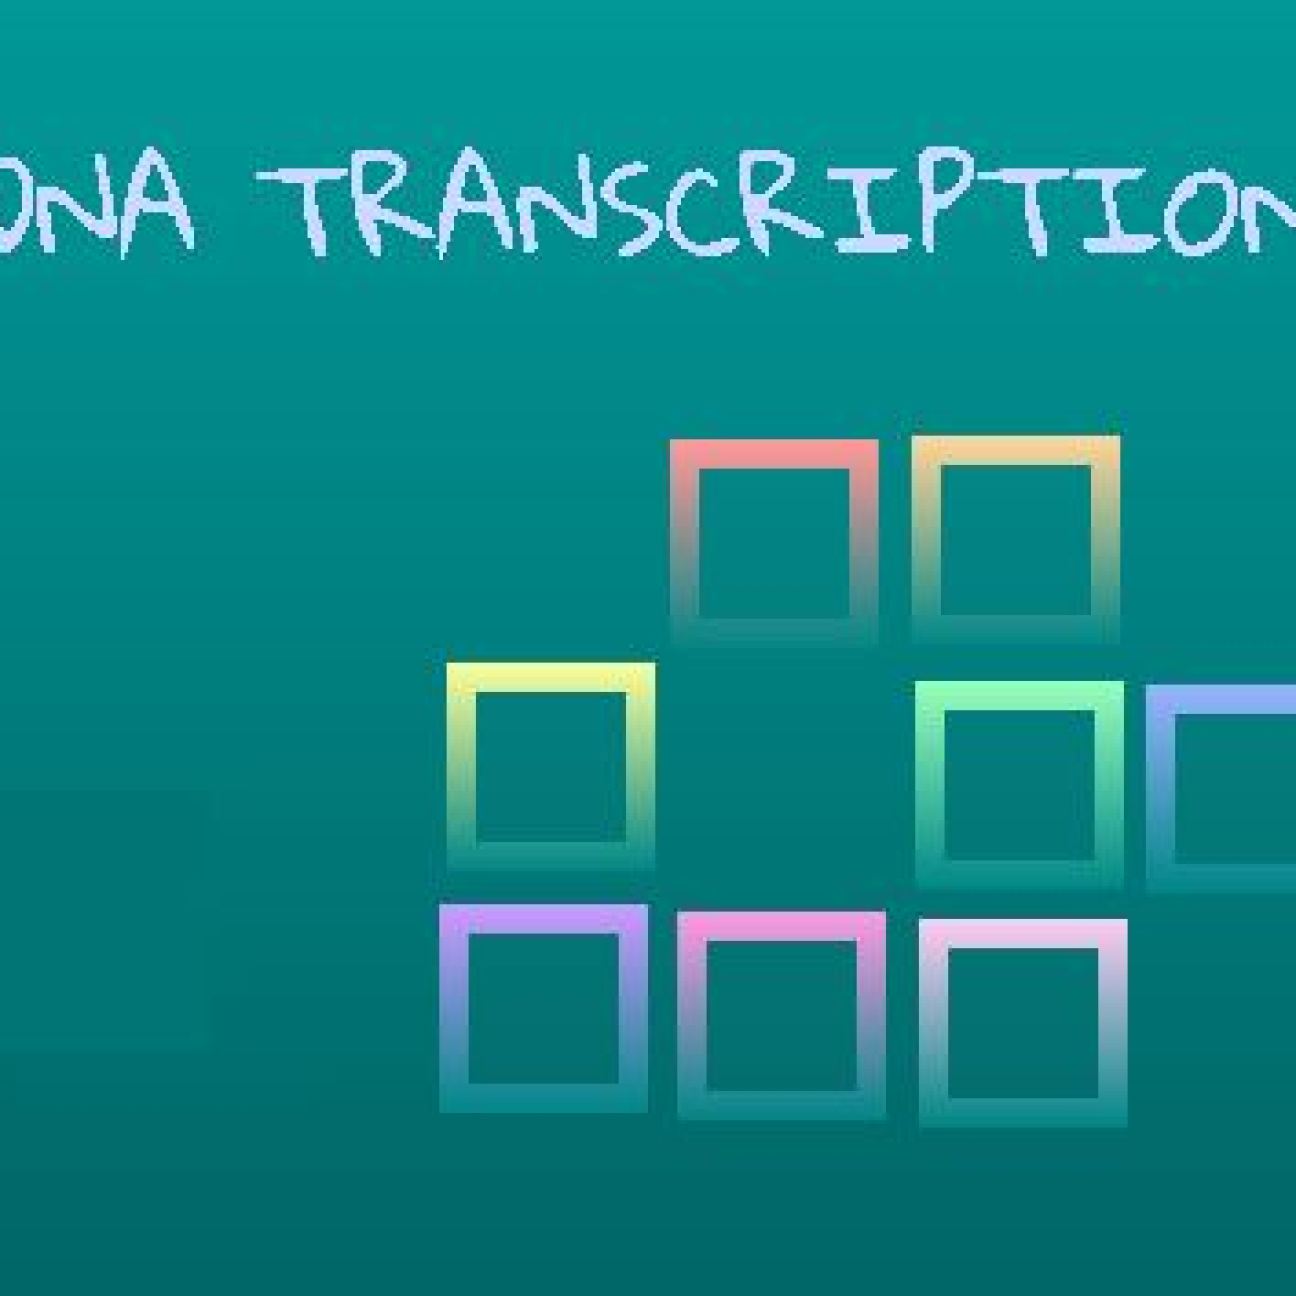 This SCRATCH project automatically converts DNA strand sequences into mRNA strand sequences.